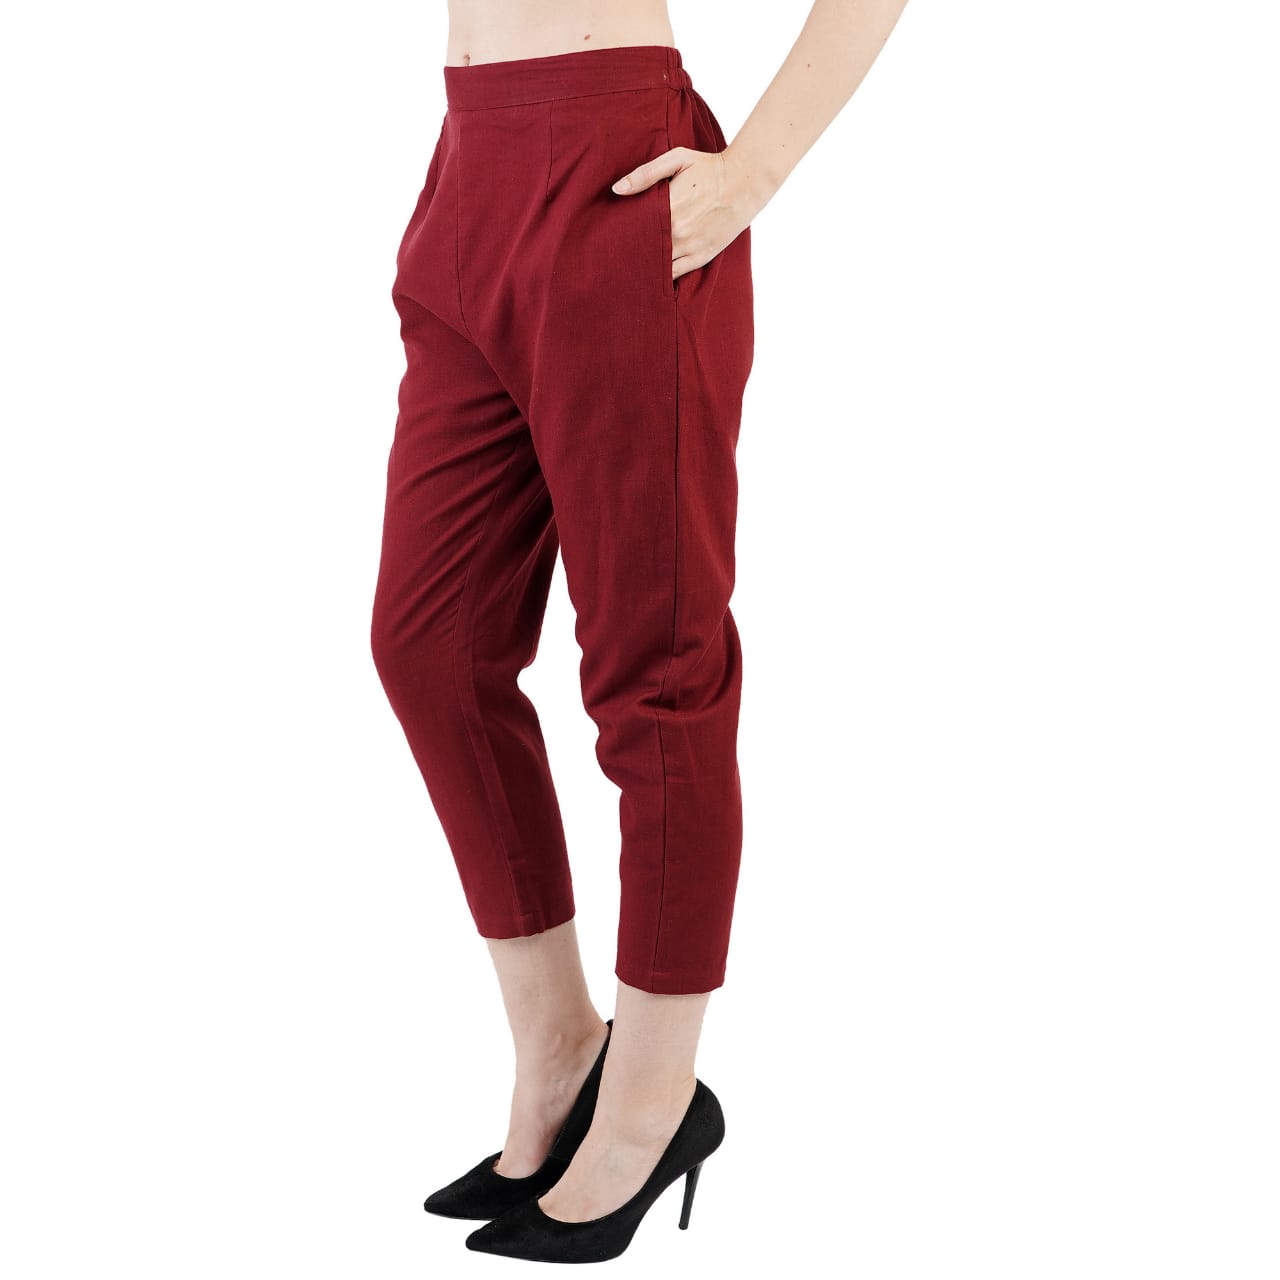 Women's Cotton Blend Formal Wear Ankle Length Straight Pants For Girls (Maroon)